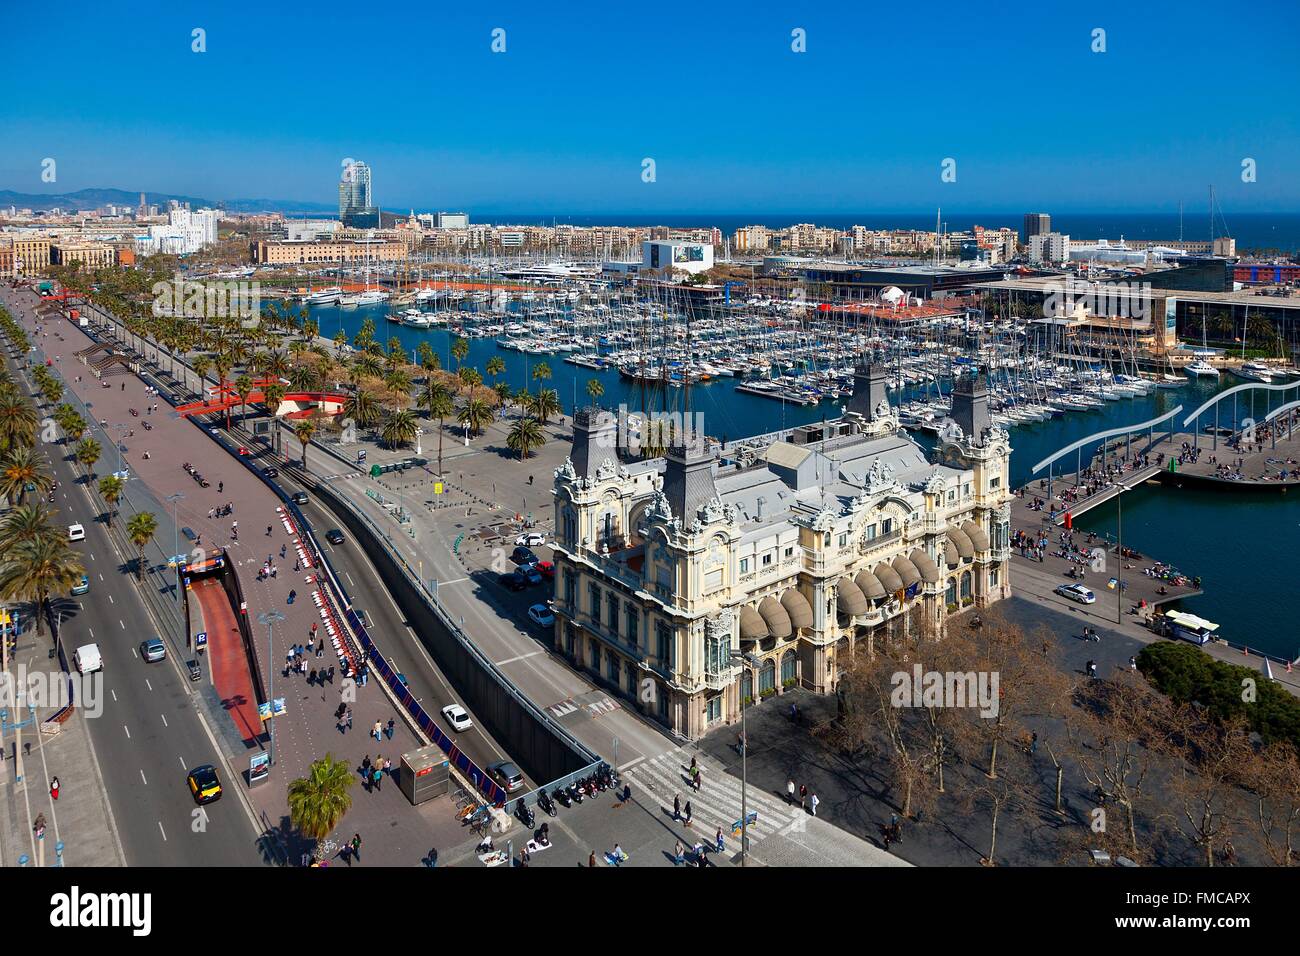 Spain, Catalonia, Barcelona, Panoramic view of the Port Vell, the Old Harbour, and the Barceloneta district Stock Photo